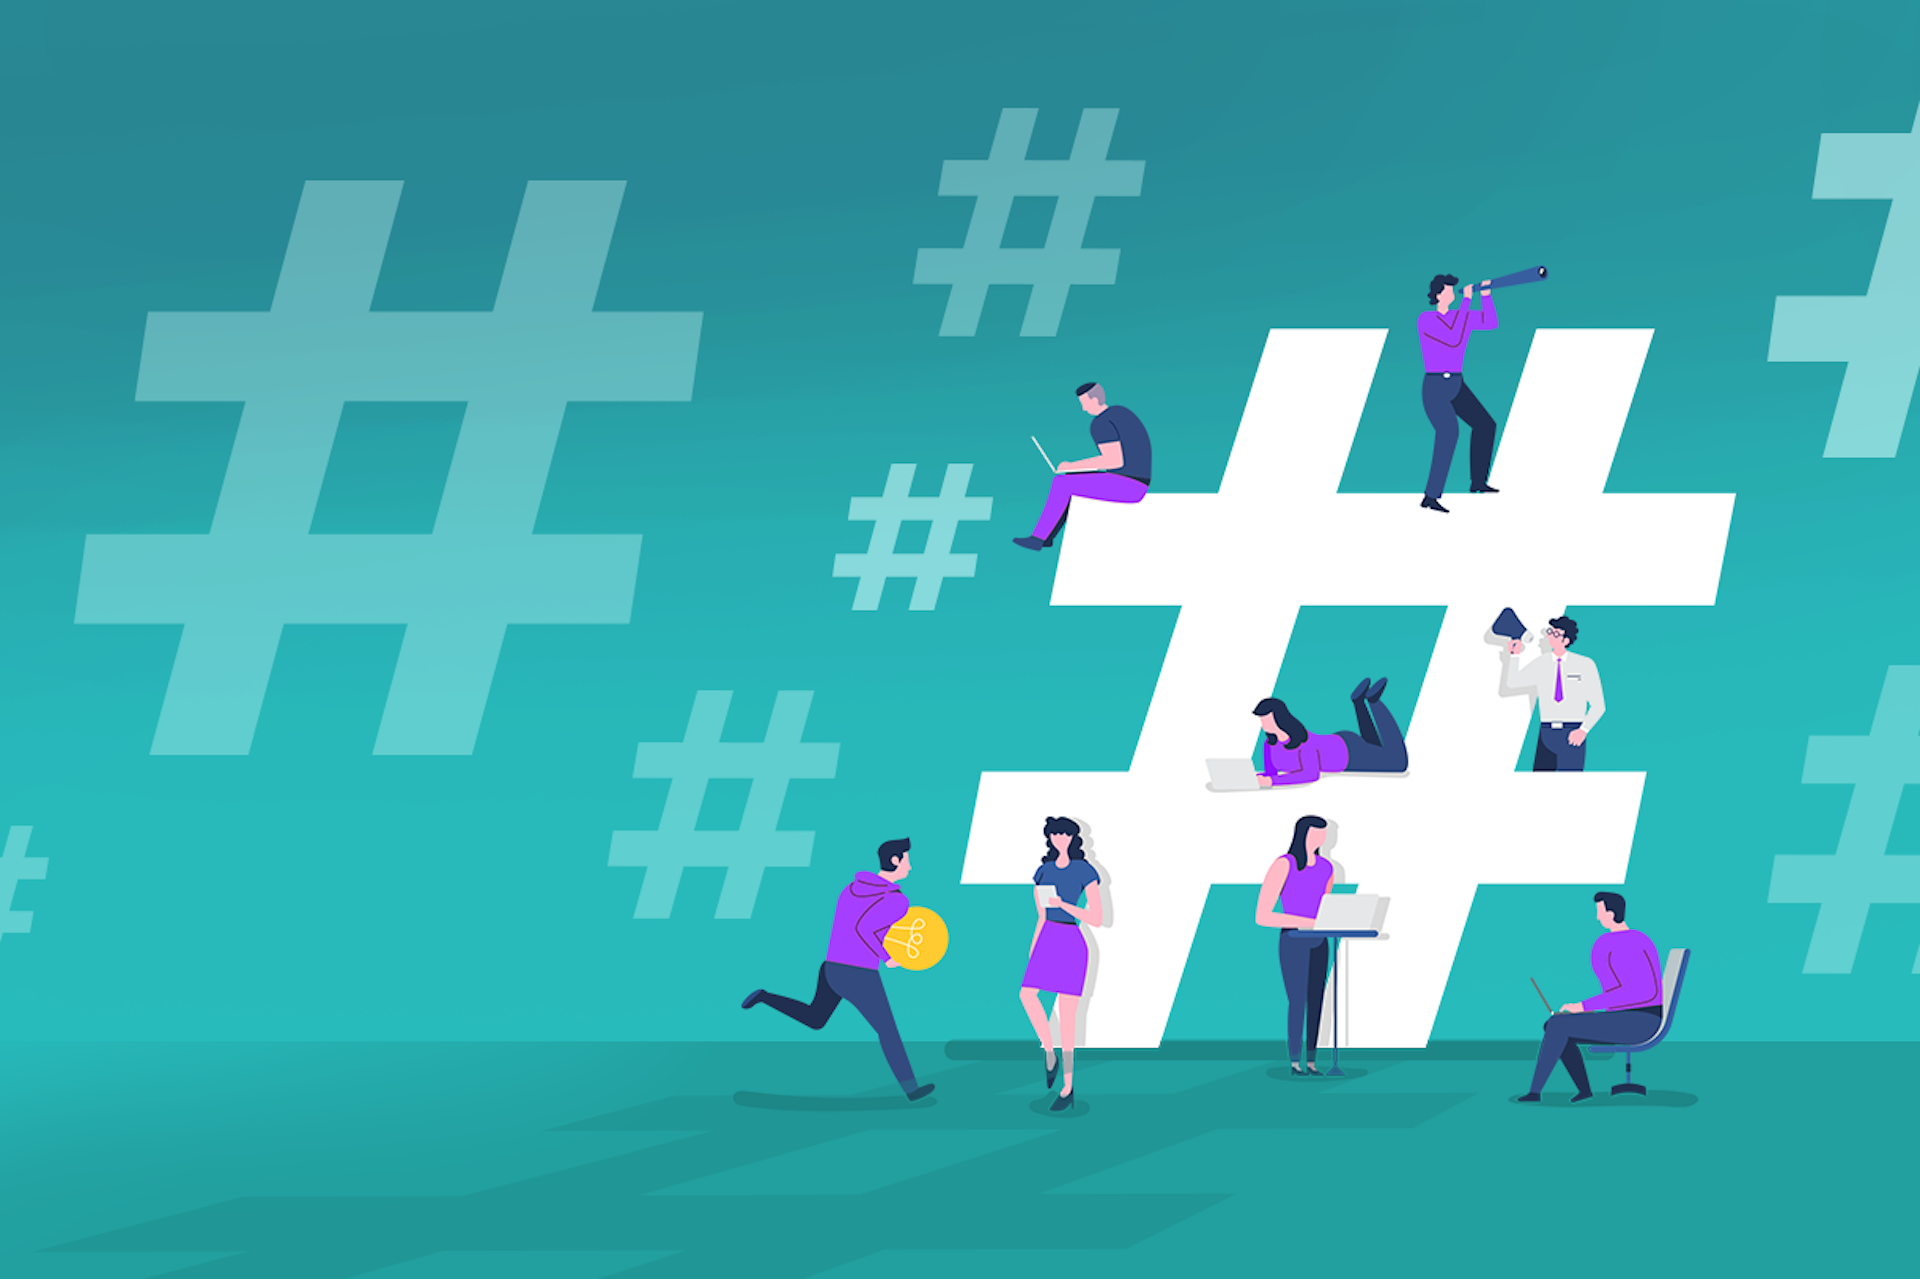 Illustration of floating hashtag icons with people sitting on one large hashtag using various electronic devices